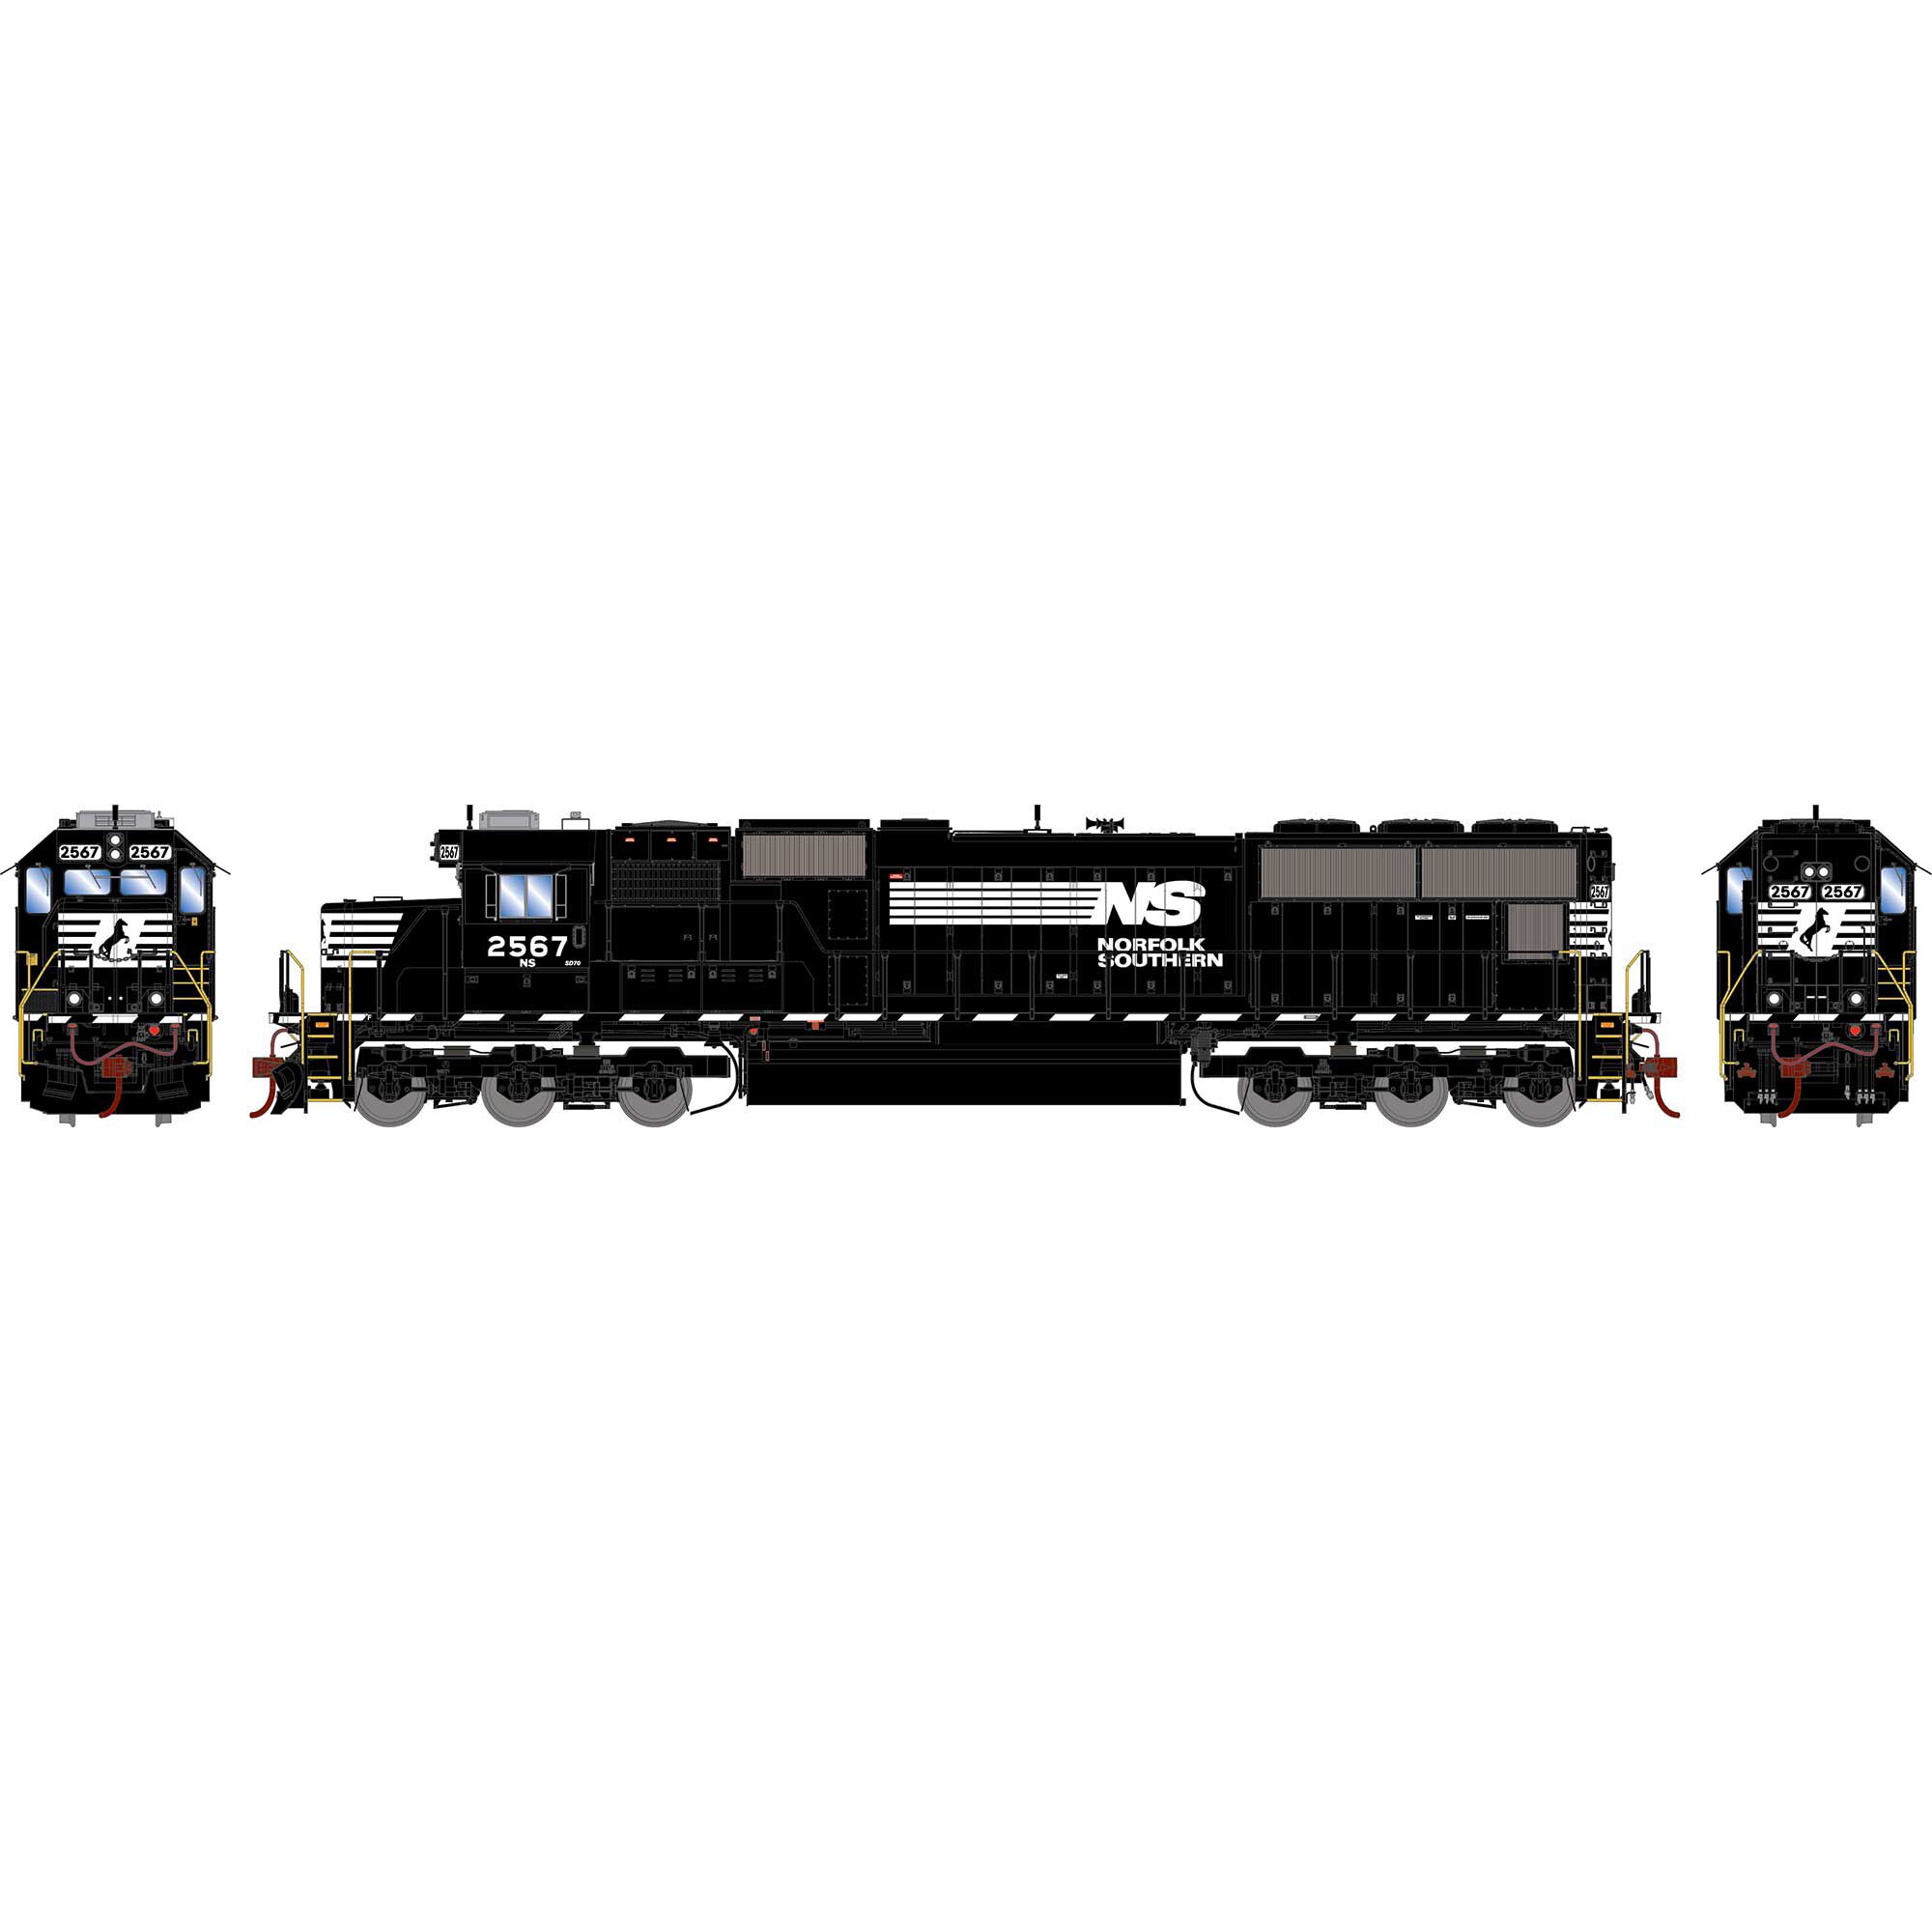 Nゲージ Athearn NorfolkSouthern NS2507 SD70-